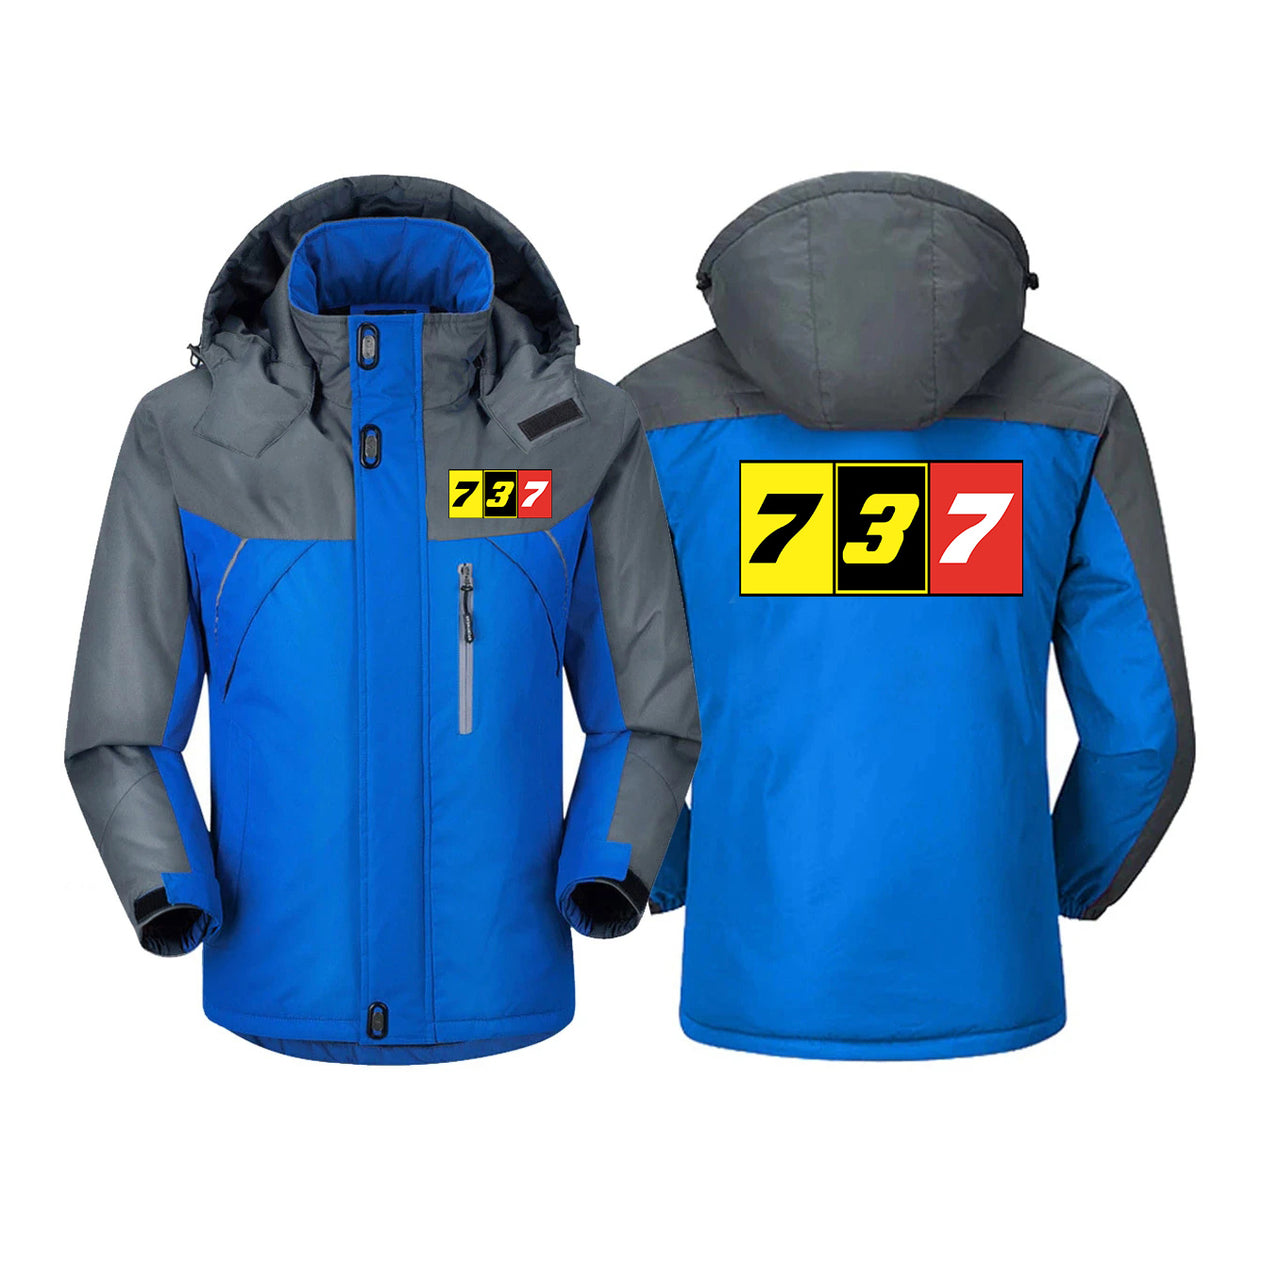 Flat Colourful 737 Designed Thick Winter Jackets